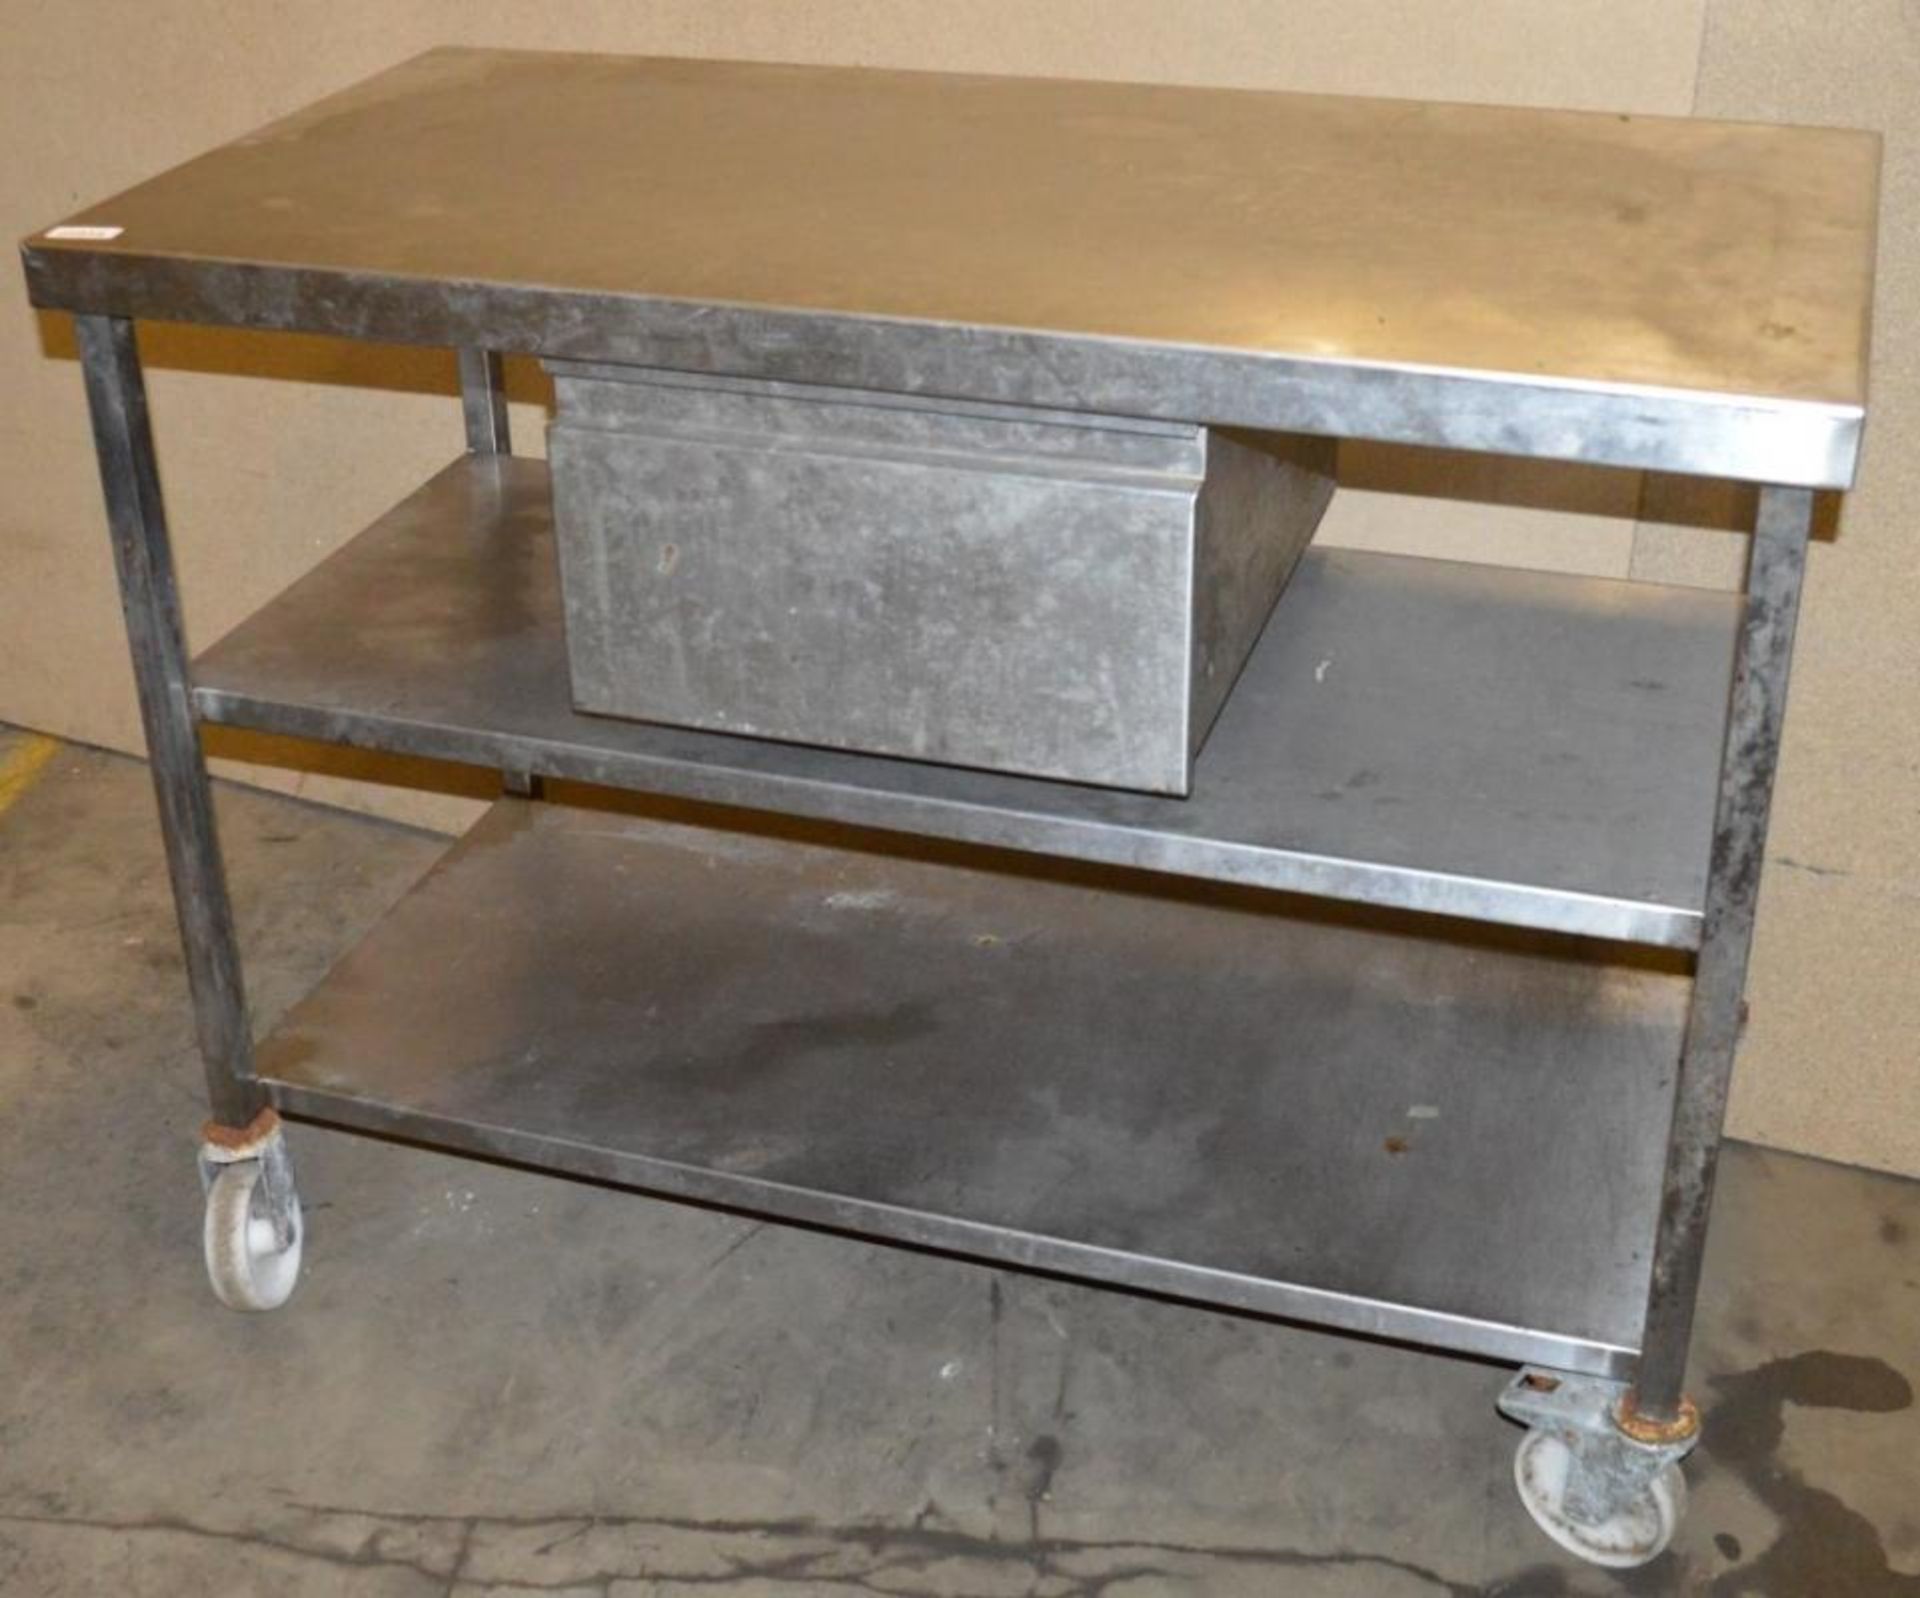 1 x Stainless Steel Prep Bench With Undershelves, Integral Drawer and Castor Wheels - H91 x W120 x